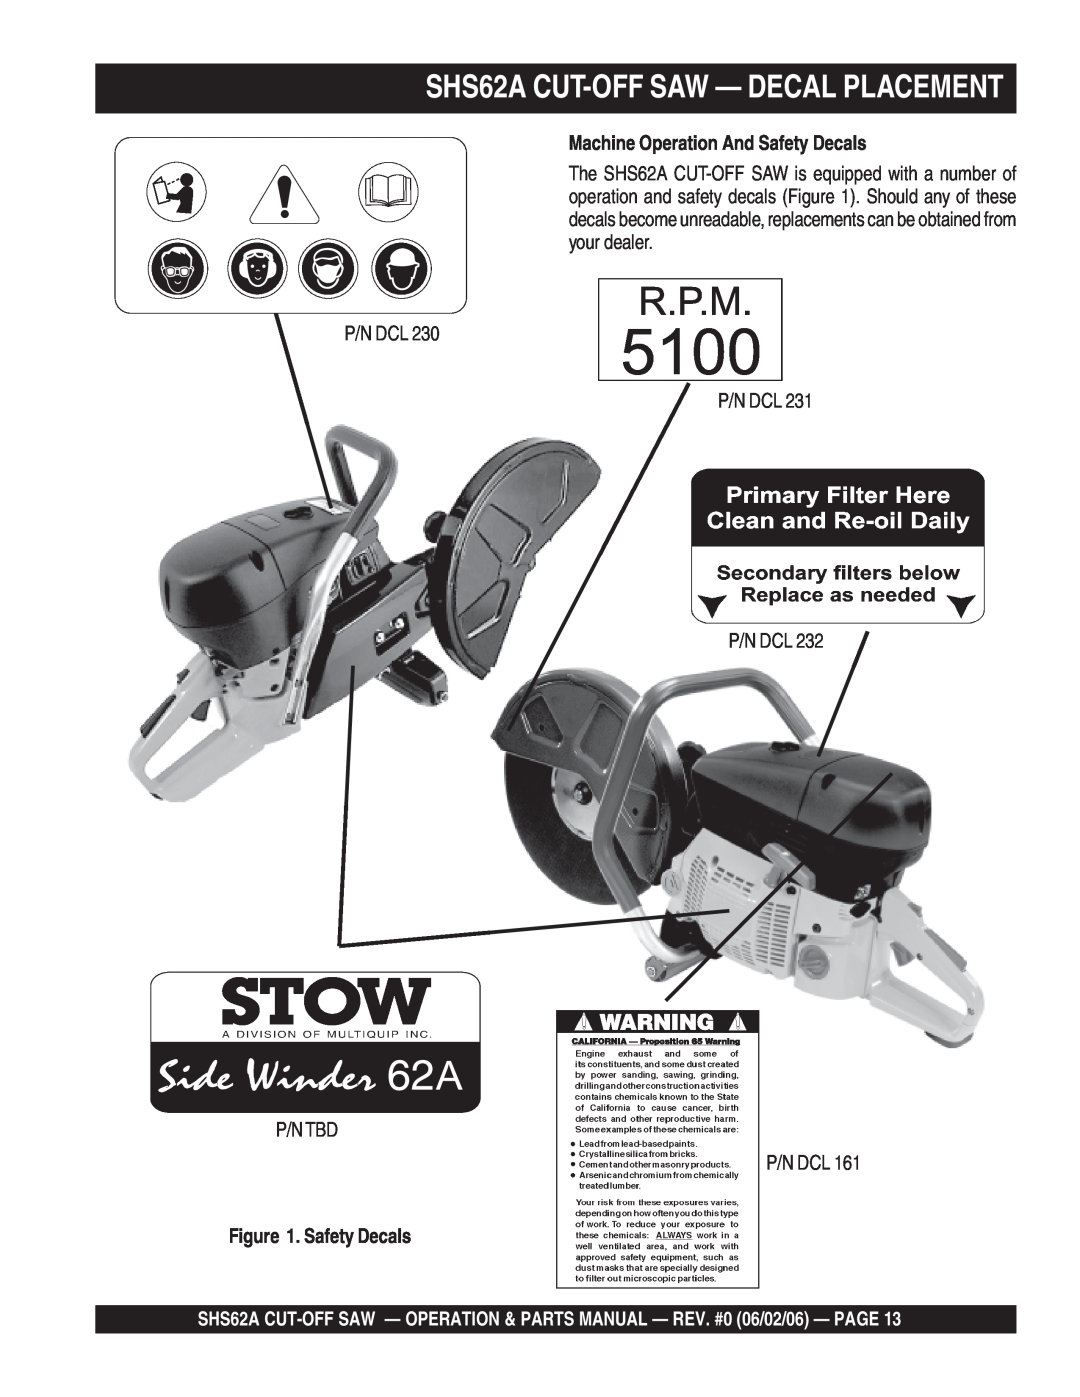 Stow manual SHS62A CUT-OFF SAW - DECAL PLACEMENT, Machine Operation And Safety Decals 